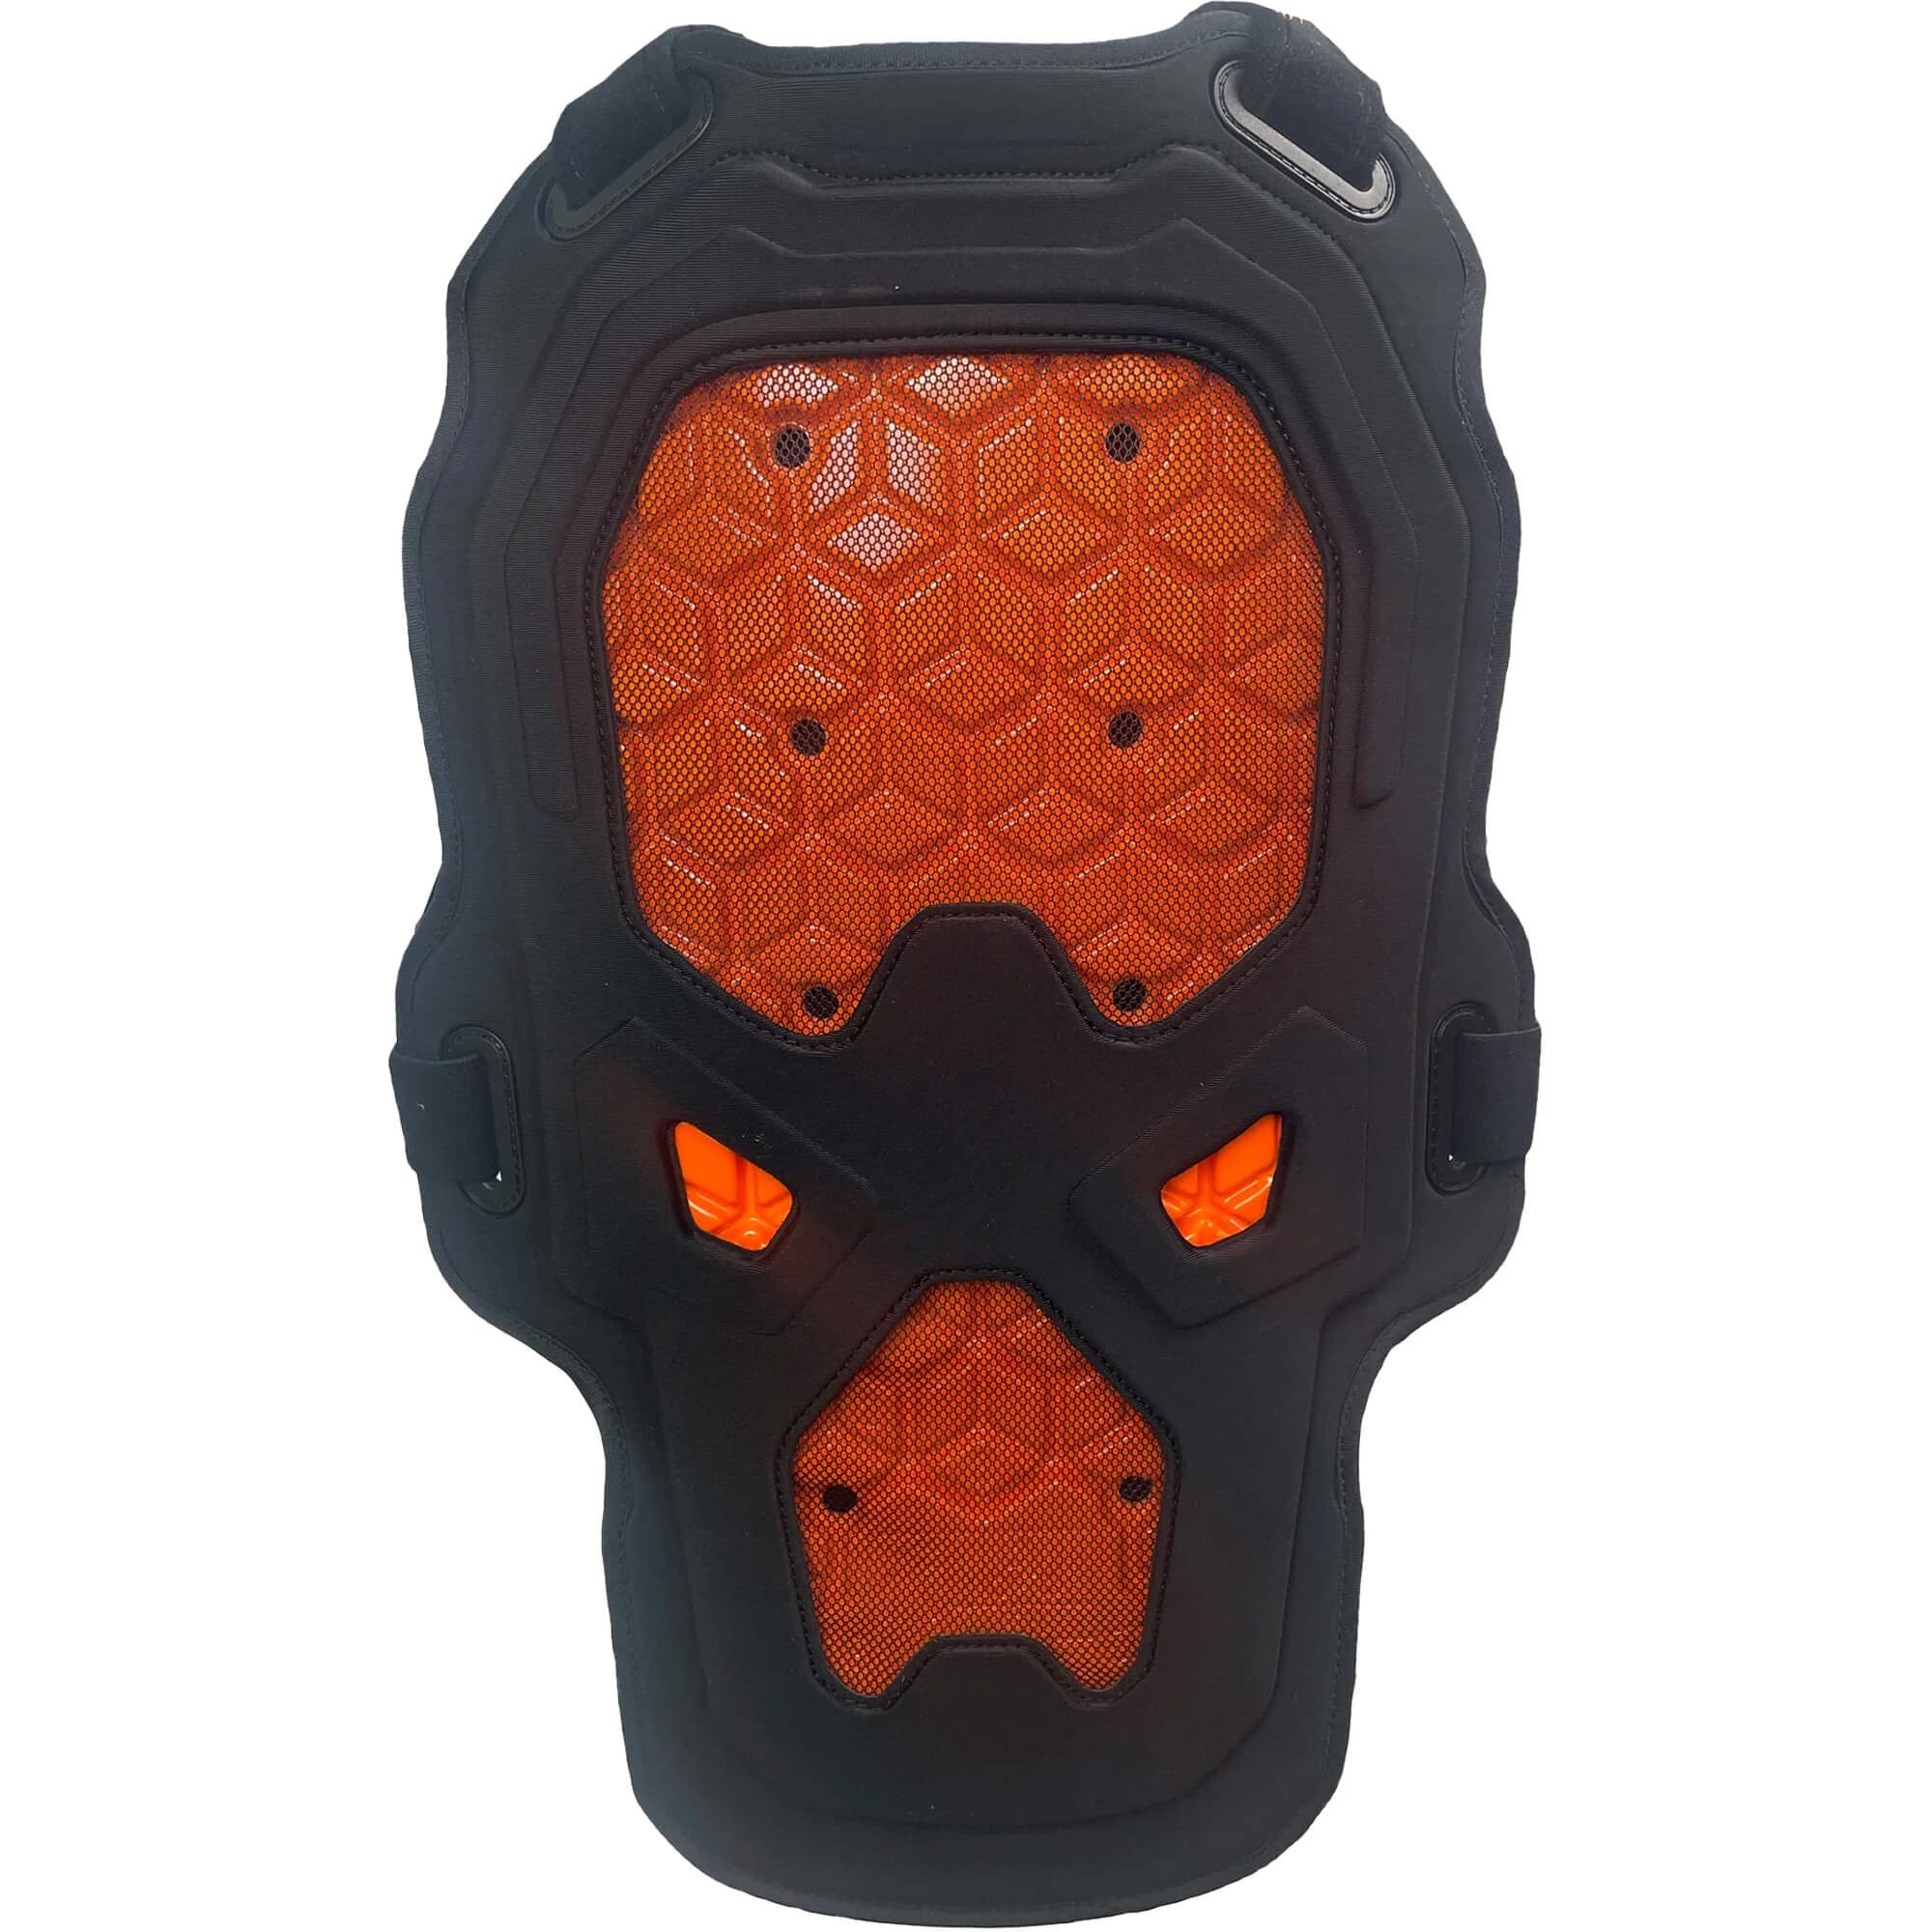 Demon Ghost D3O  Ski/Snowboard Chest & Back Protector